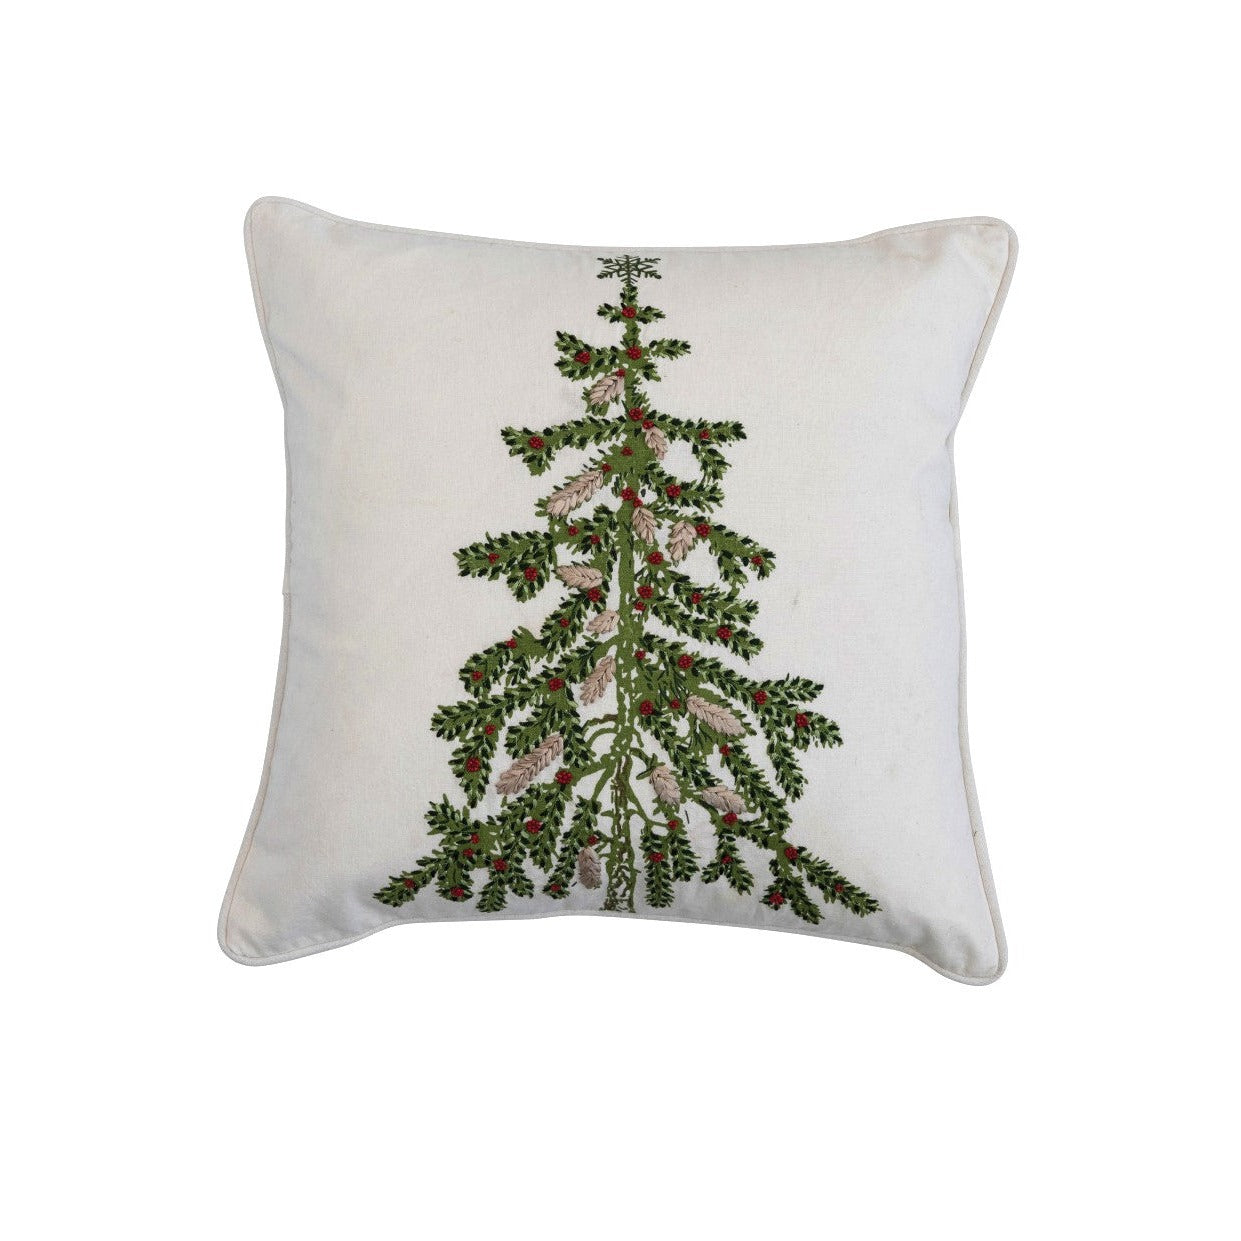 Christmas Tree Cotton Printed Pillow with Embroidered Accents, 18" Square